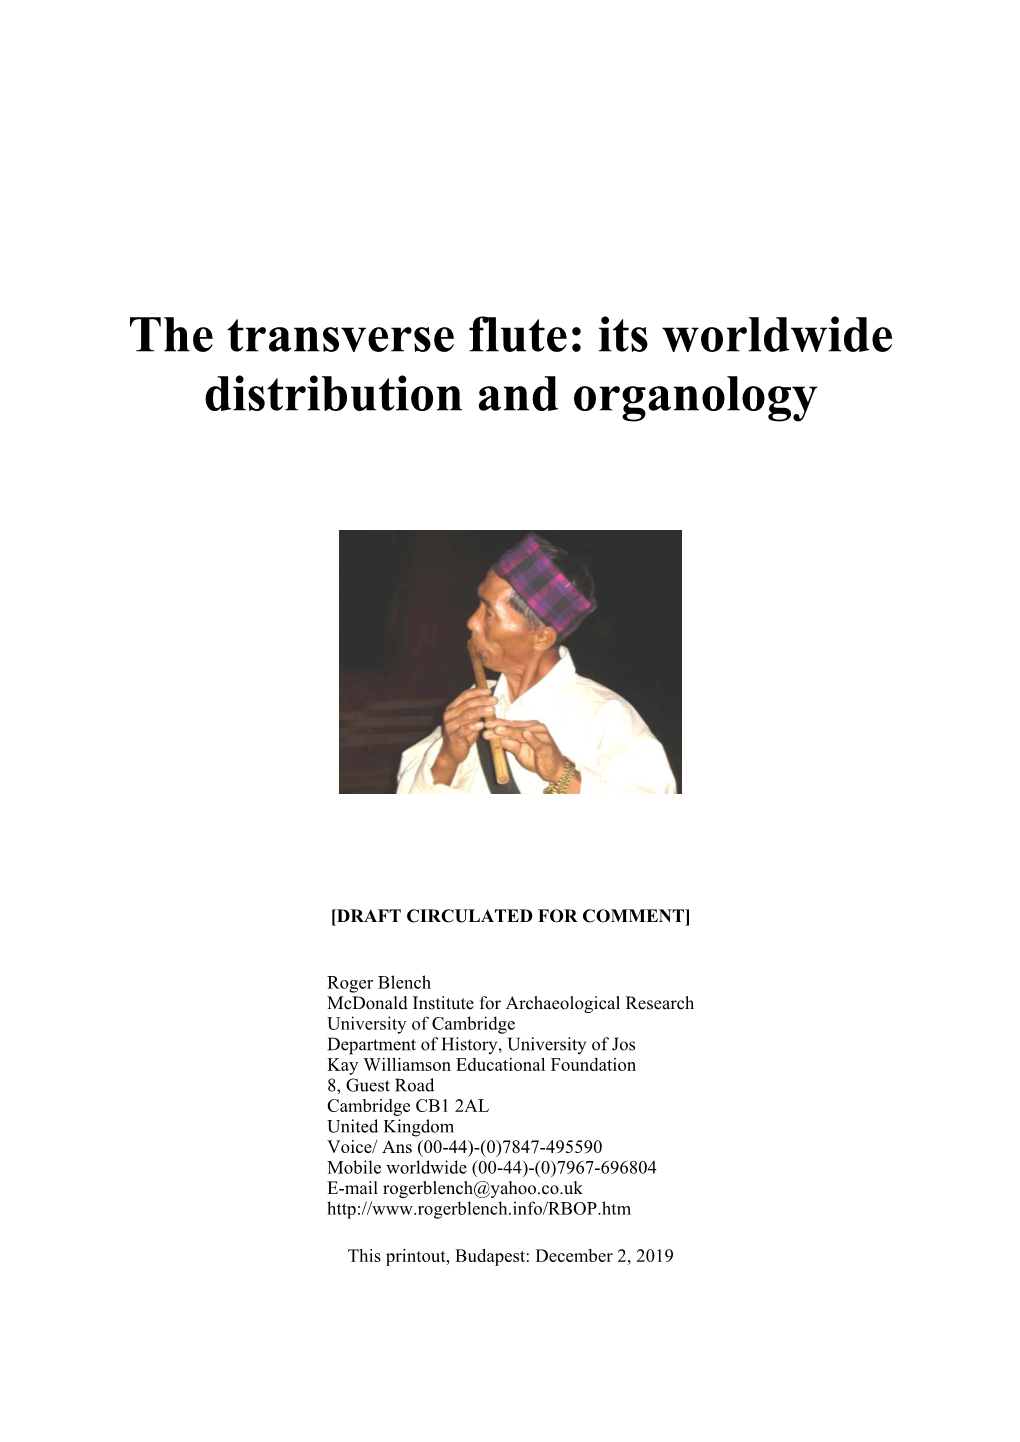 The Transverse Flute: Its Worldwide Distribution and Organology